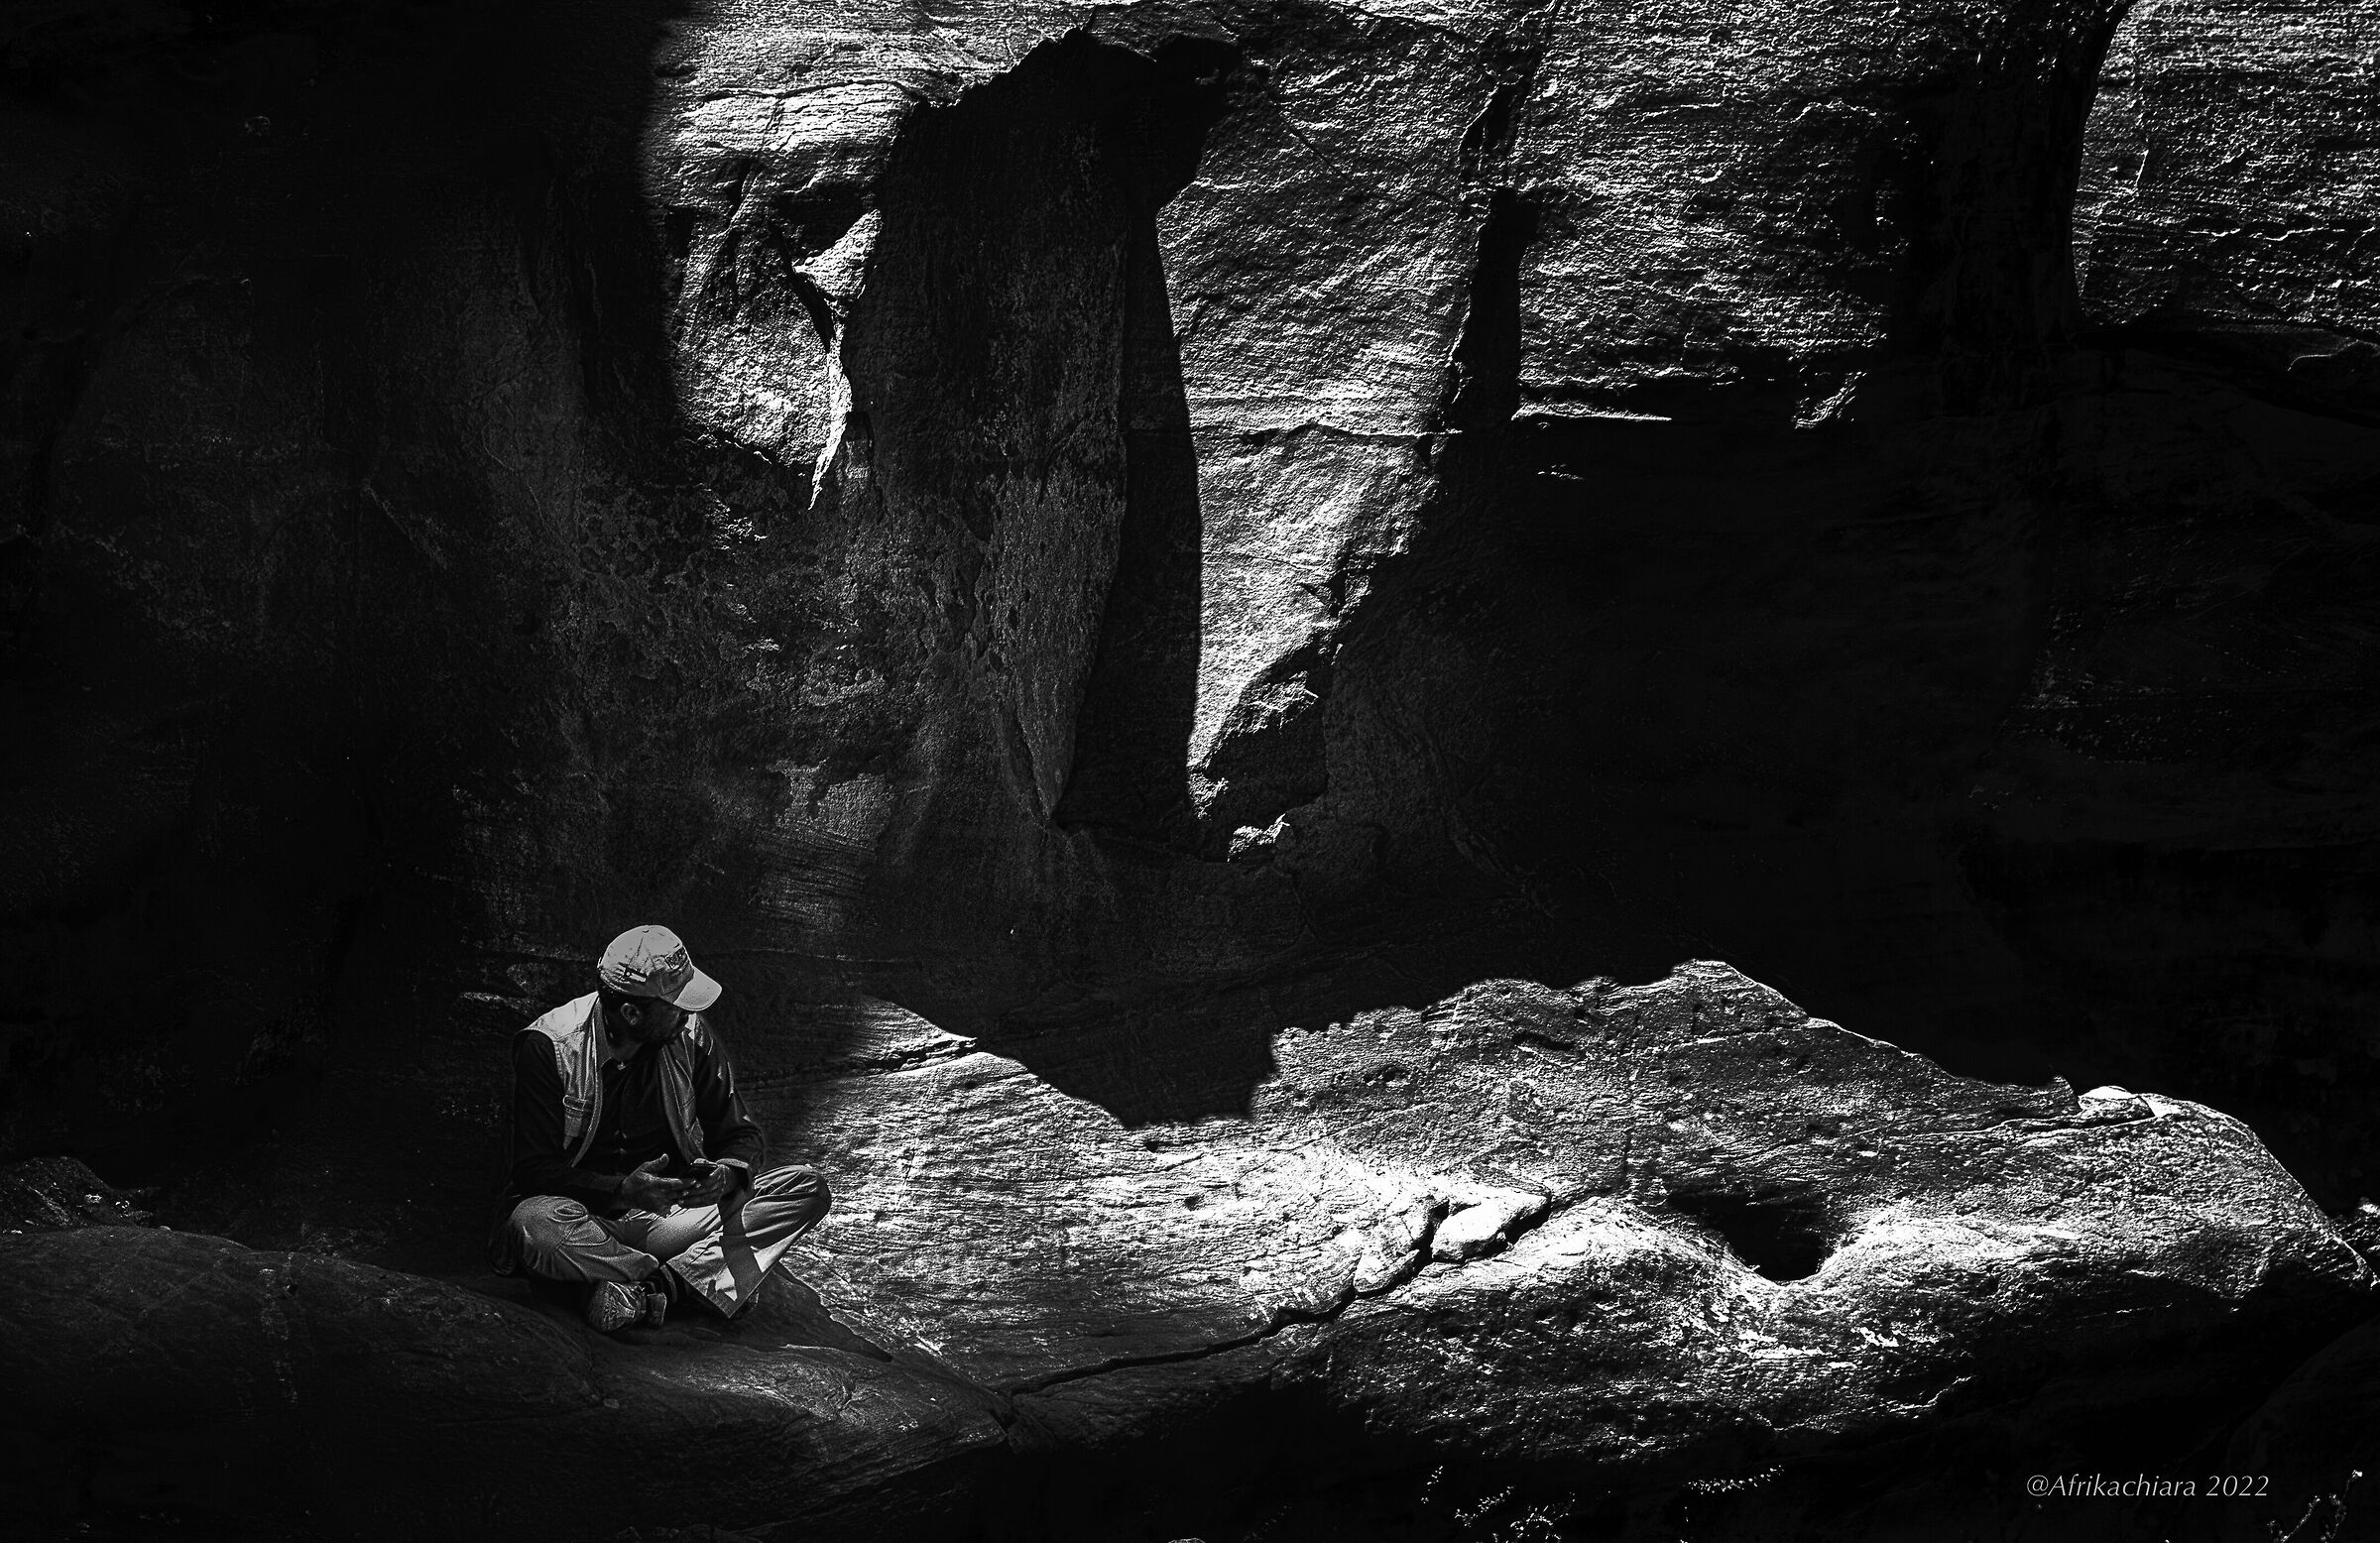 The solitude of the cave...